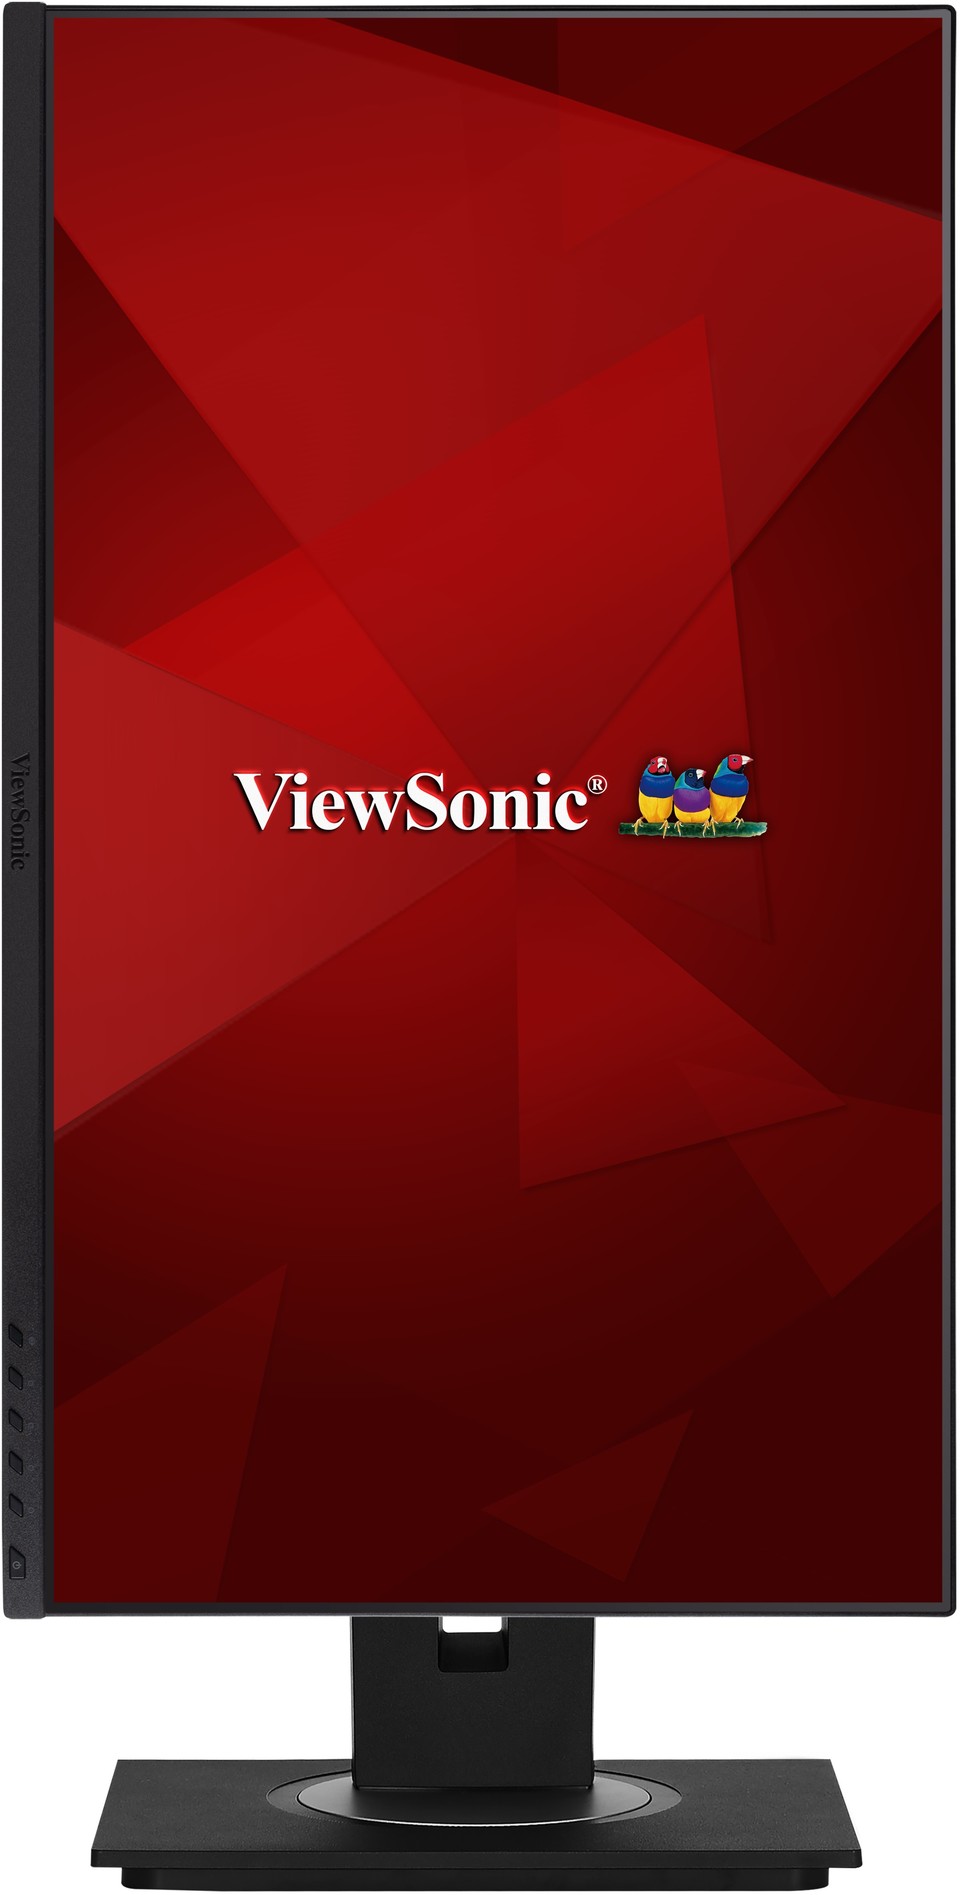 ViewSonic VG2456 24” Docking Monitor featuring USB Type-C and 